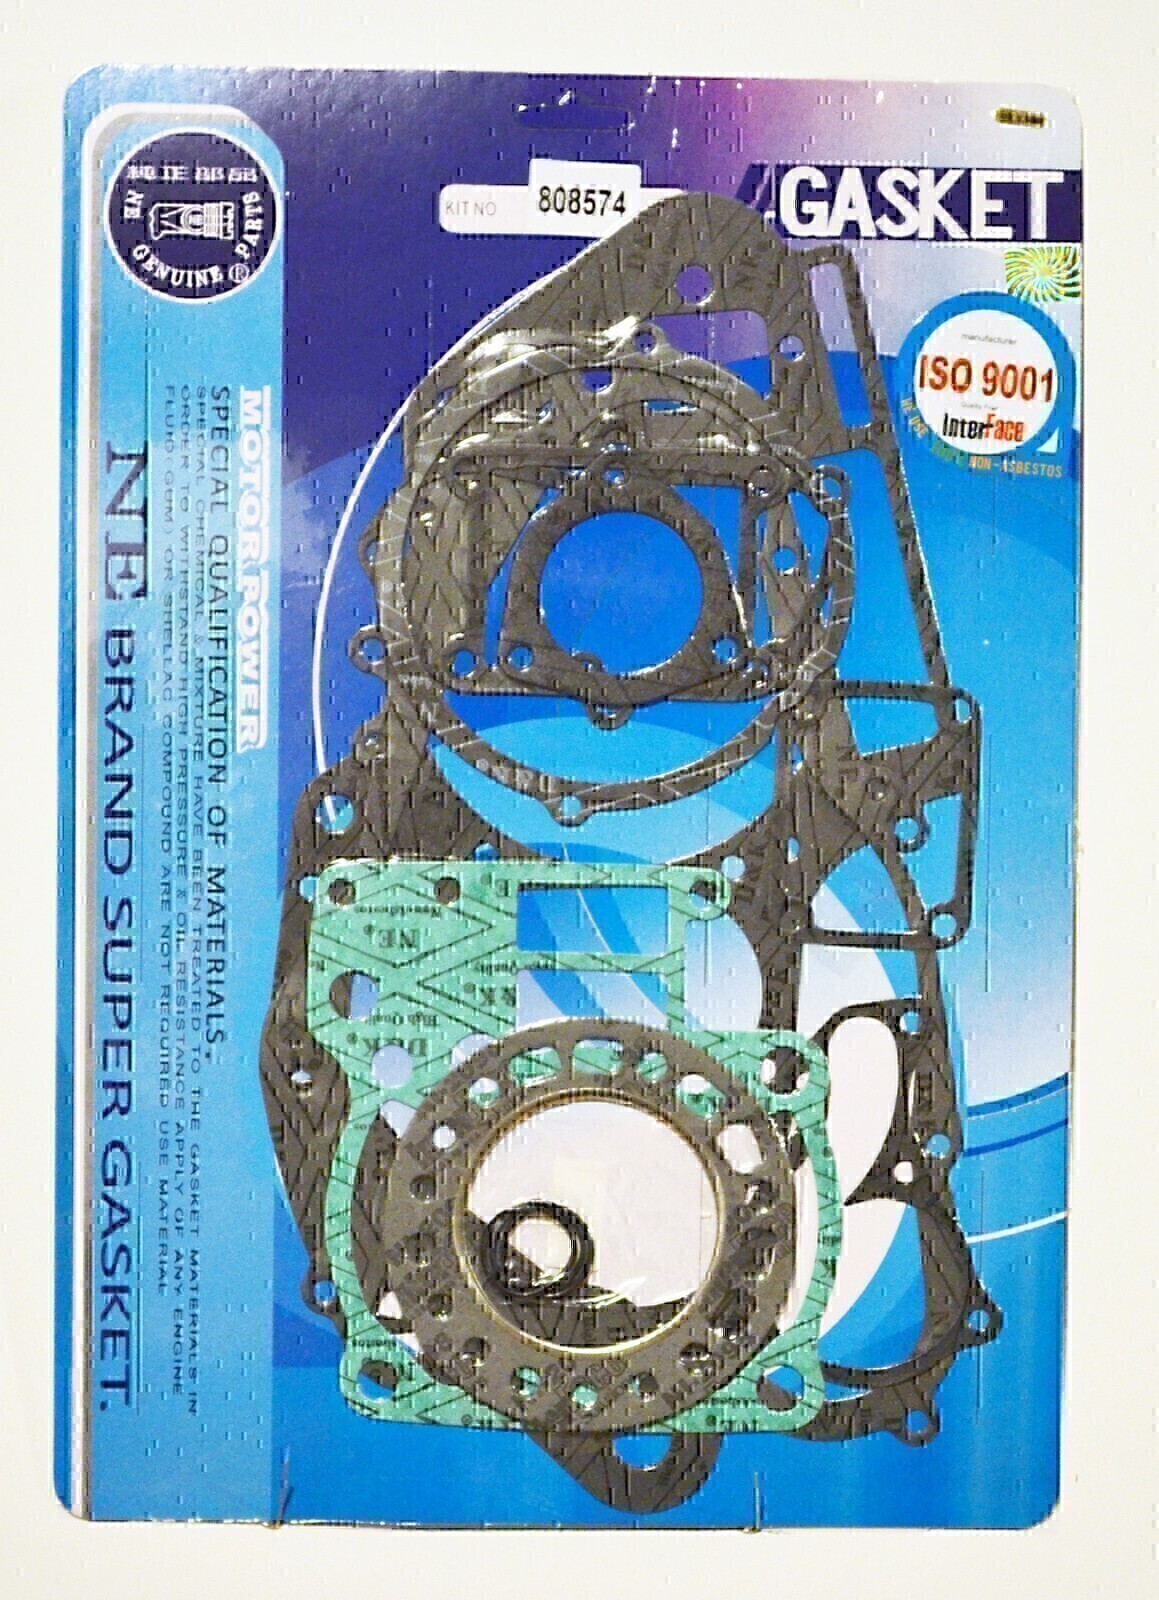 COMPLETE GASKET KIT FOR SUZUKI RM250 RM 250 1987 1988